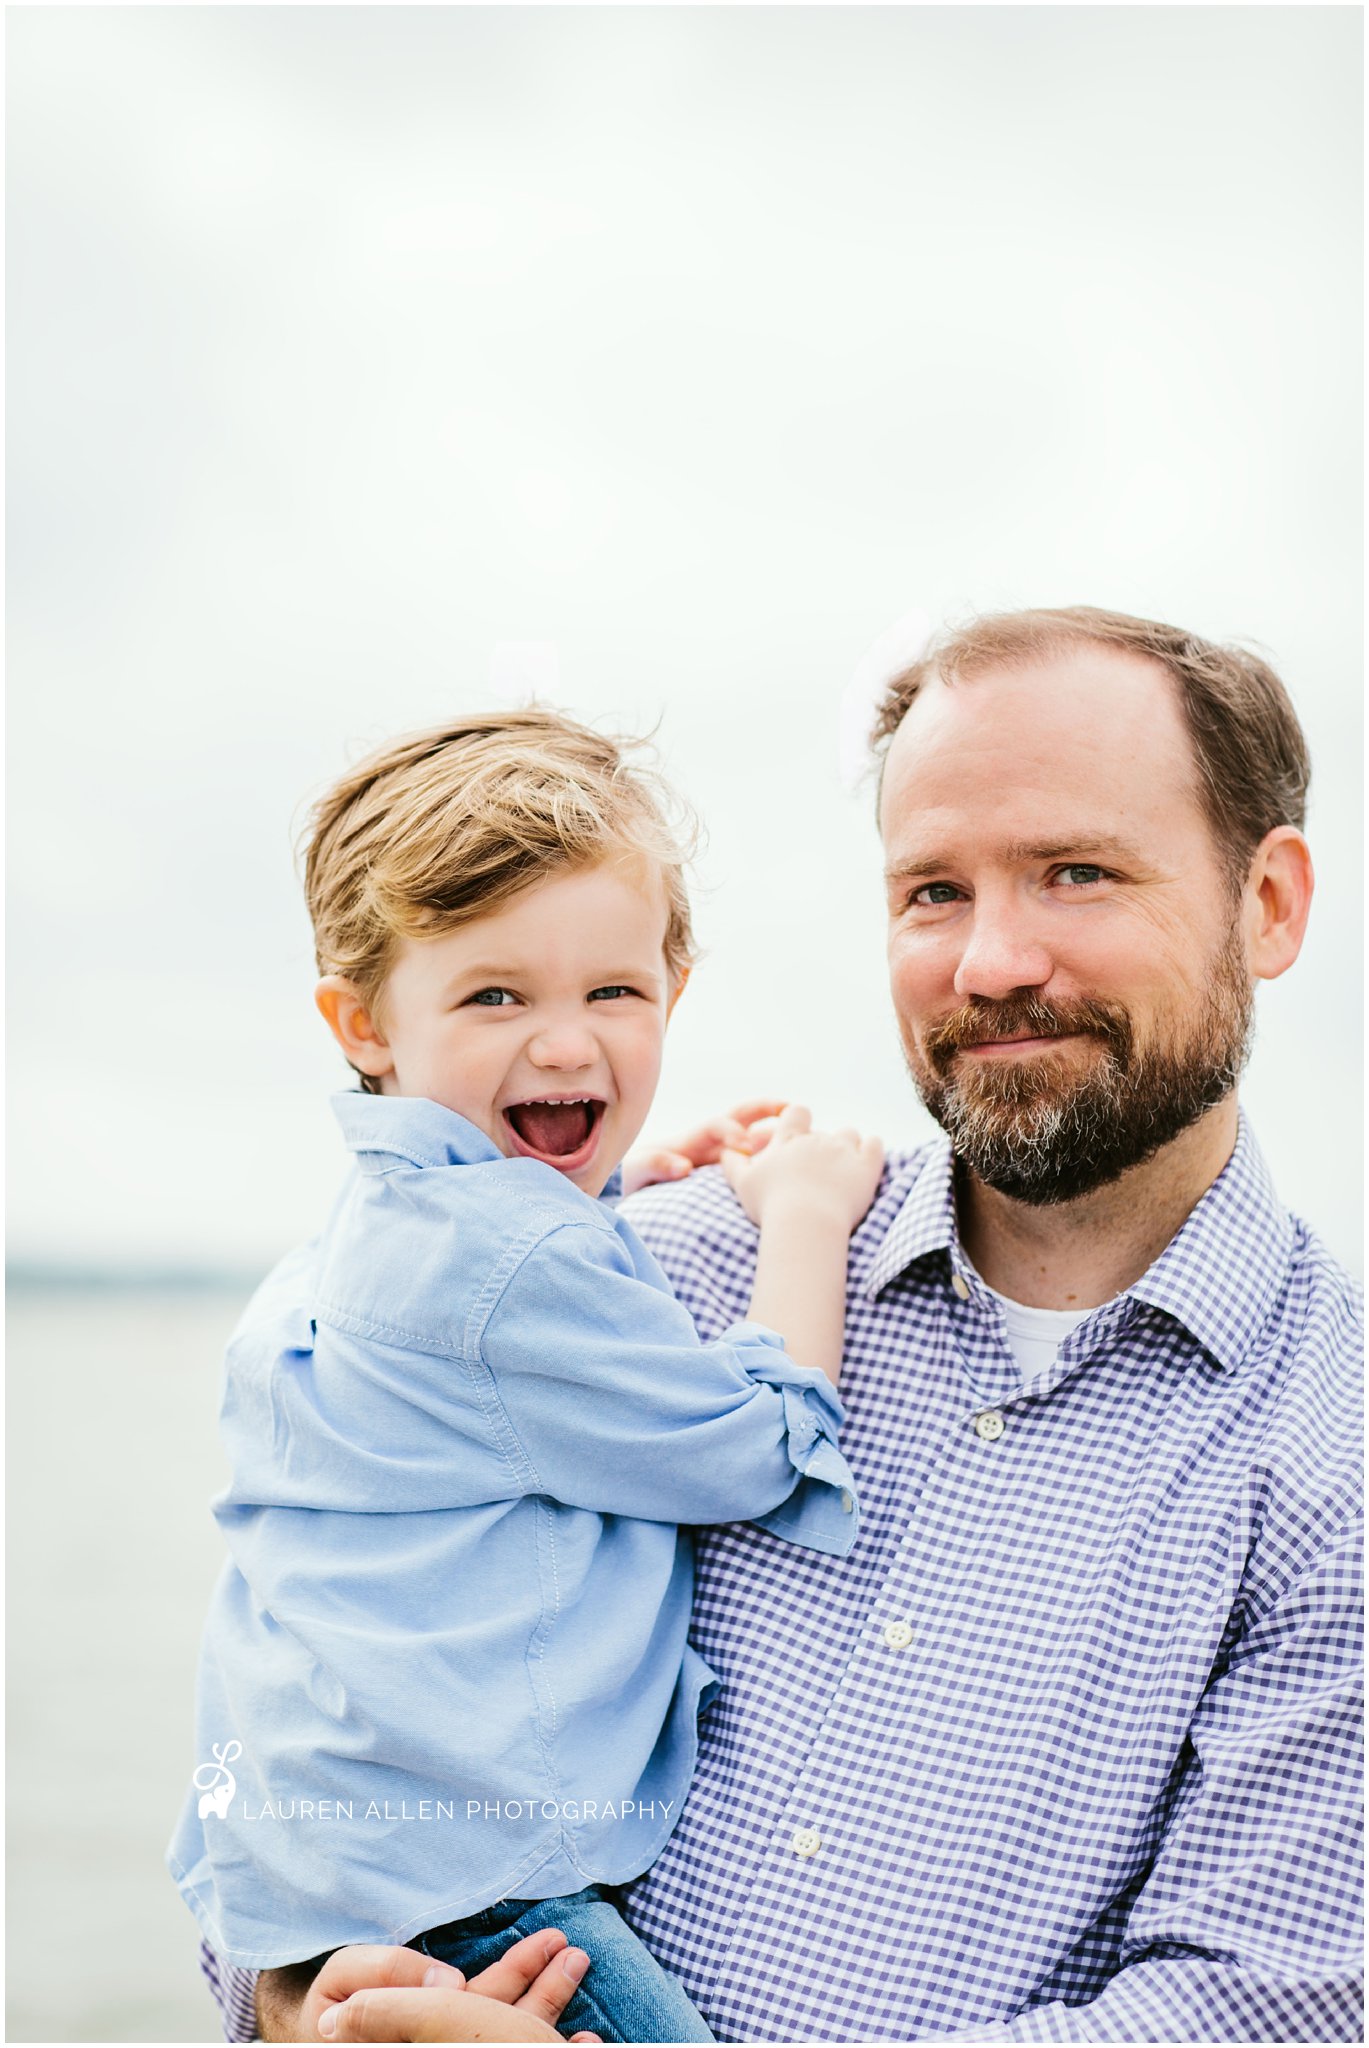 Dallas,Fall,Kearns,Lauren Allen Photography,White Rock Lake,boy,child,childhood,children,dad,dock,family,friends,henry,kids,lake,mini session,mom,outdoors,outside,parents,playing,texas,